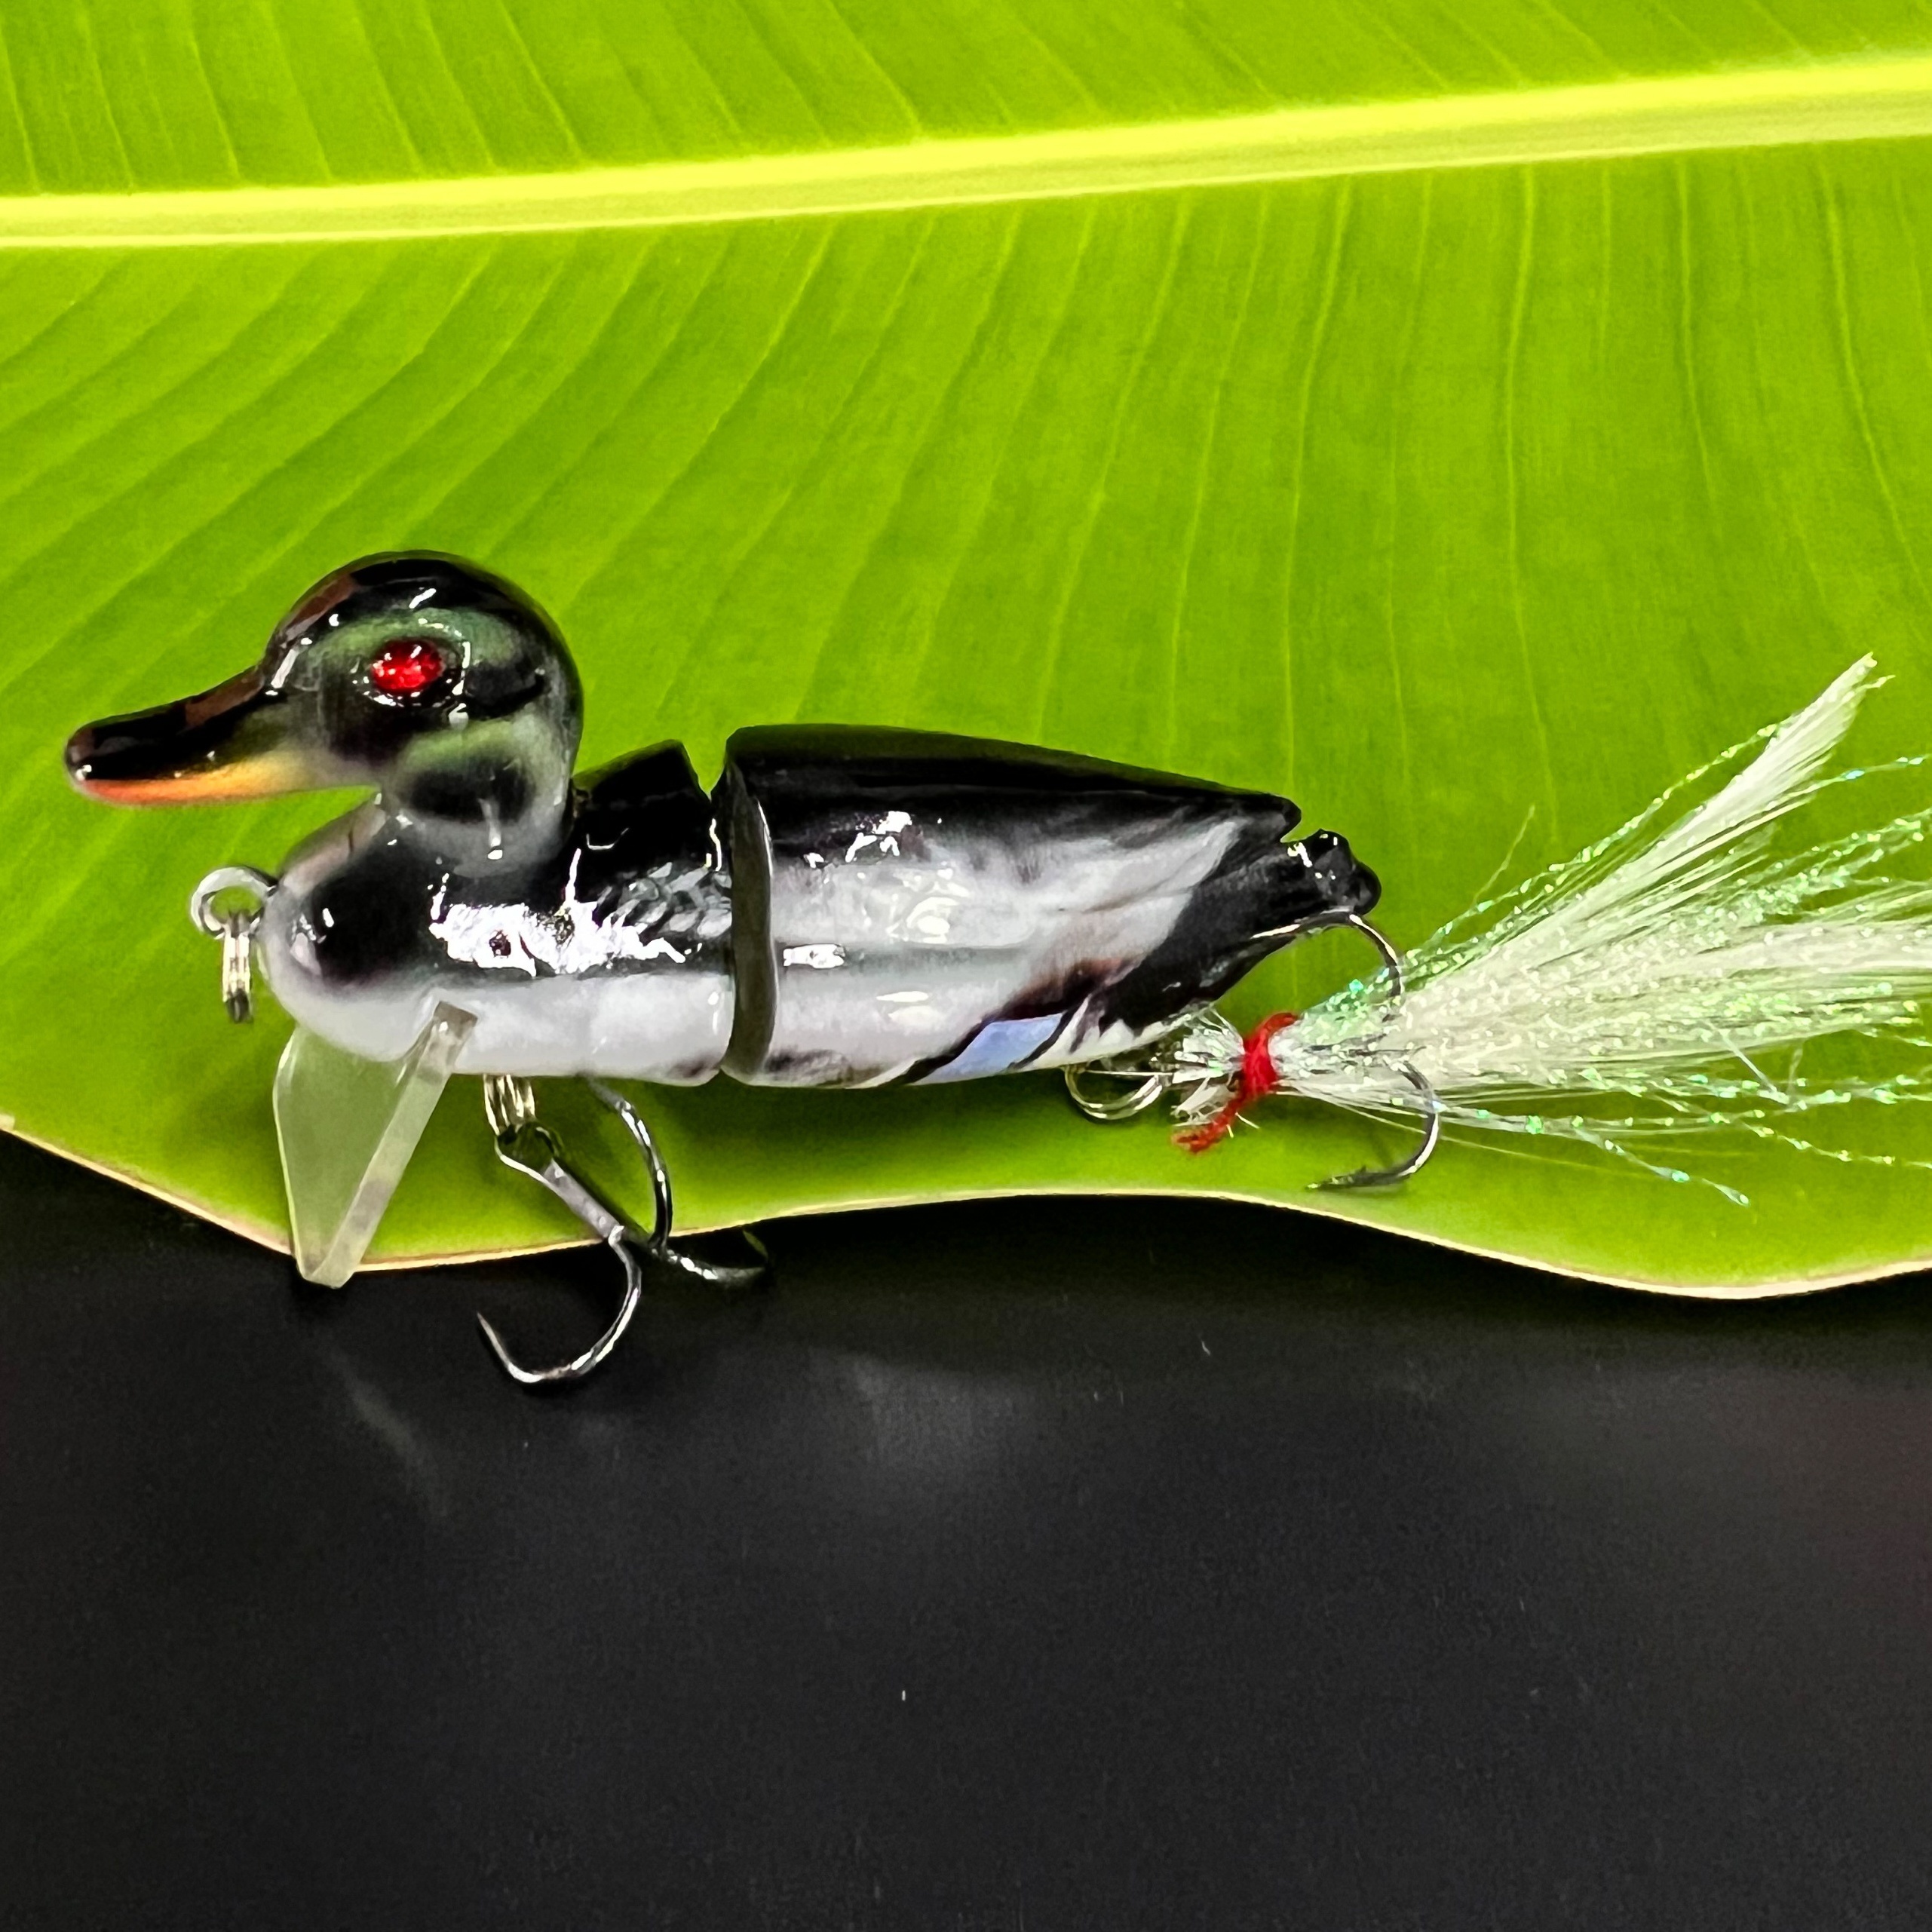 1pc 11g/0.39oz Multi Jointed Duck Hard Swimbaits, Slow Sinking Bionic  Plastic Fishing Lures Fishing Tackle Kit For Bass Trout Freshwater Saltwater